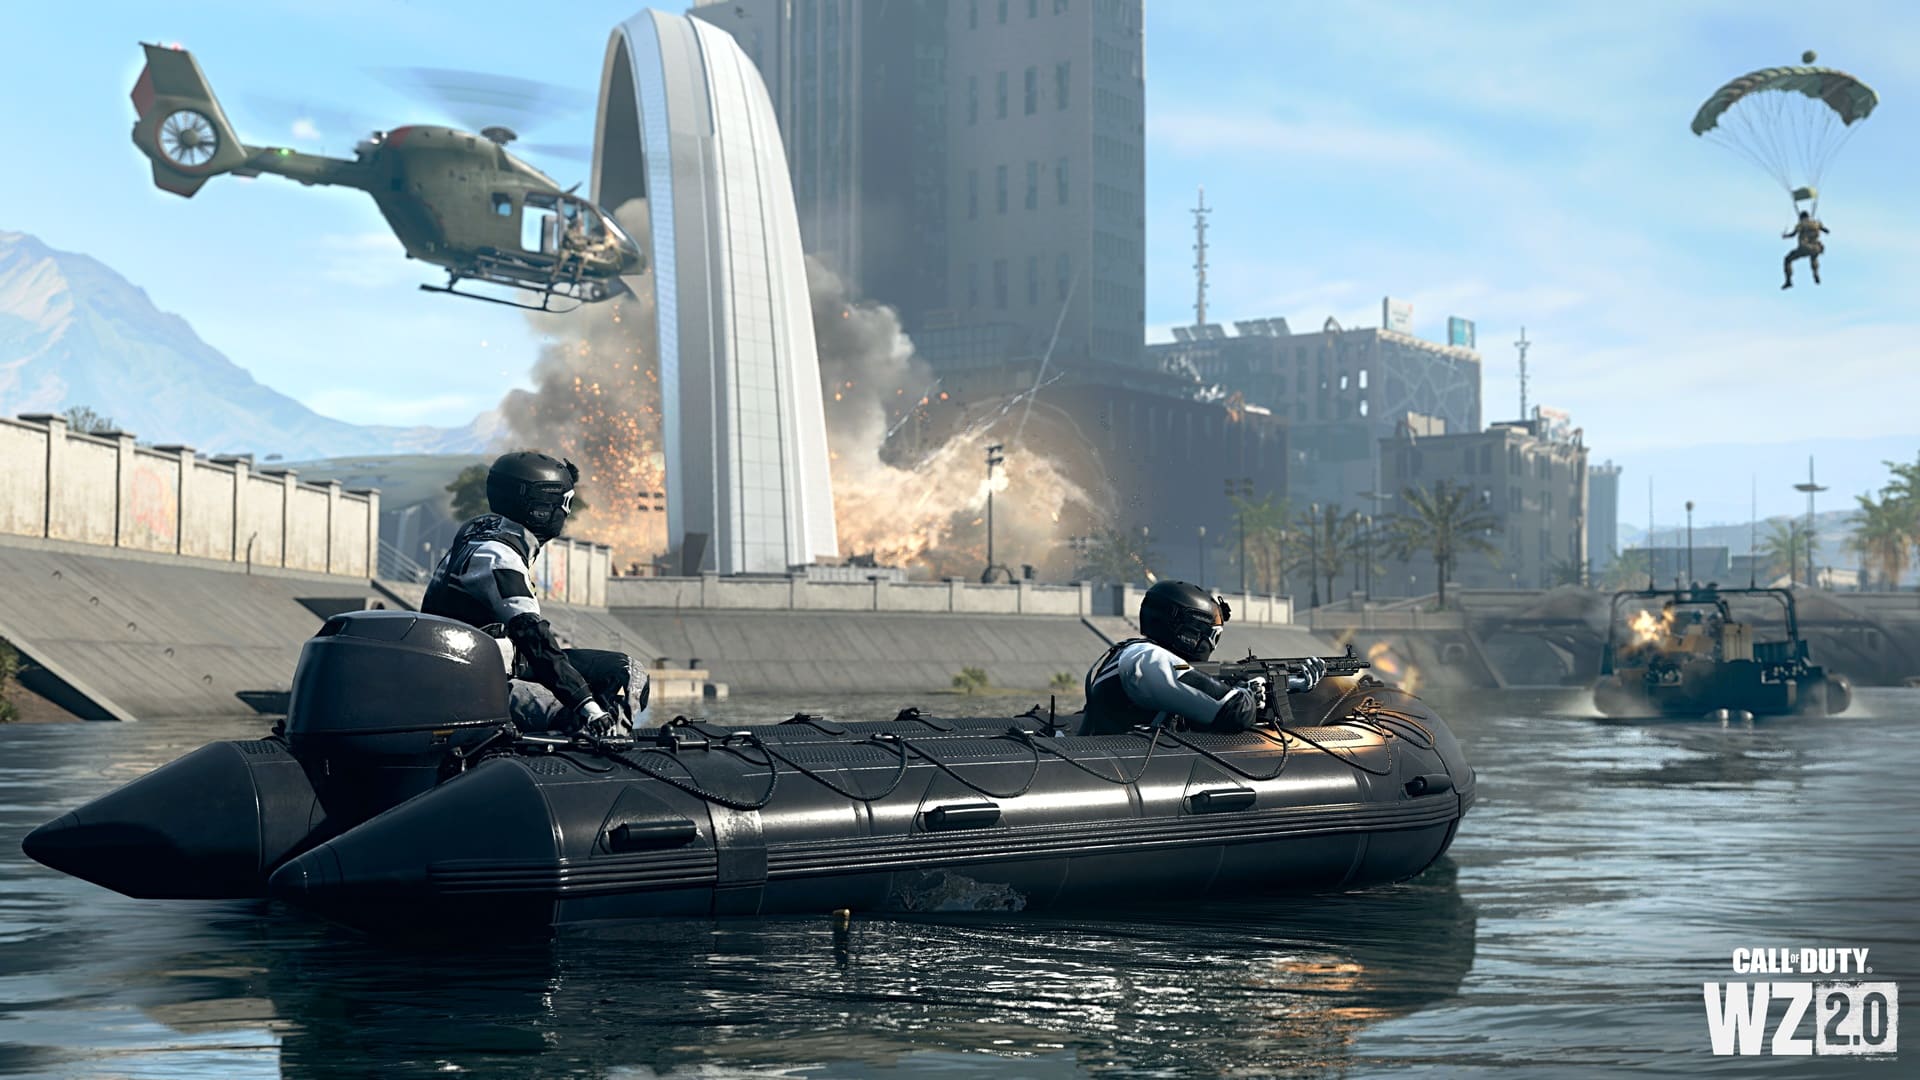 (Aquatic battles are also possible in Warzone 2, as in the campaign and multiplayer, whether in a boat or under water.)